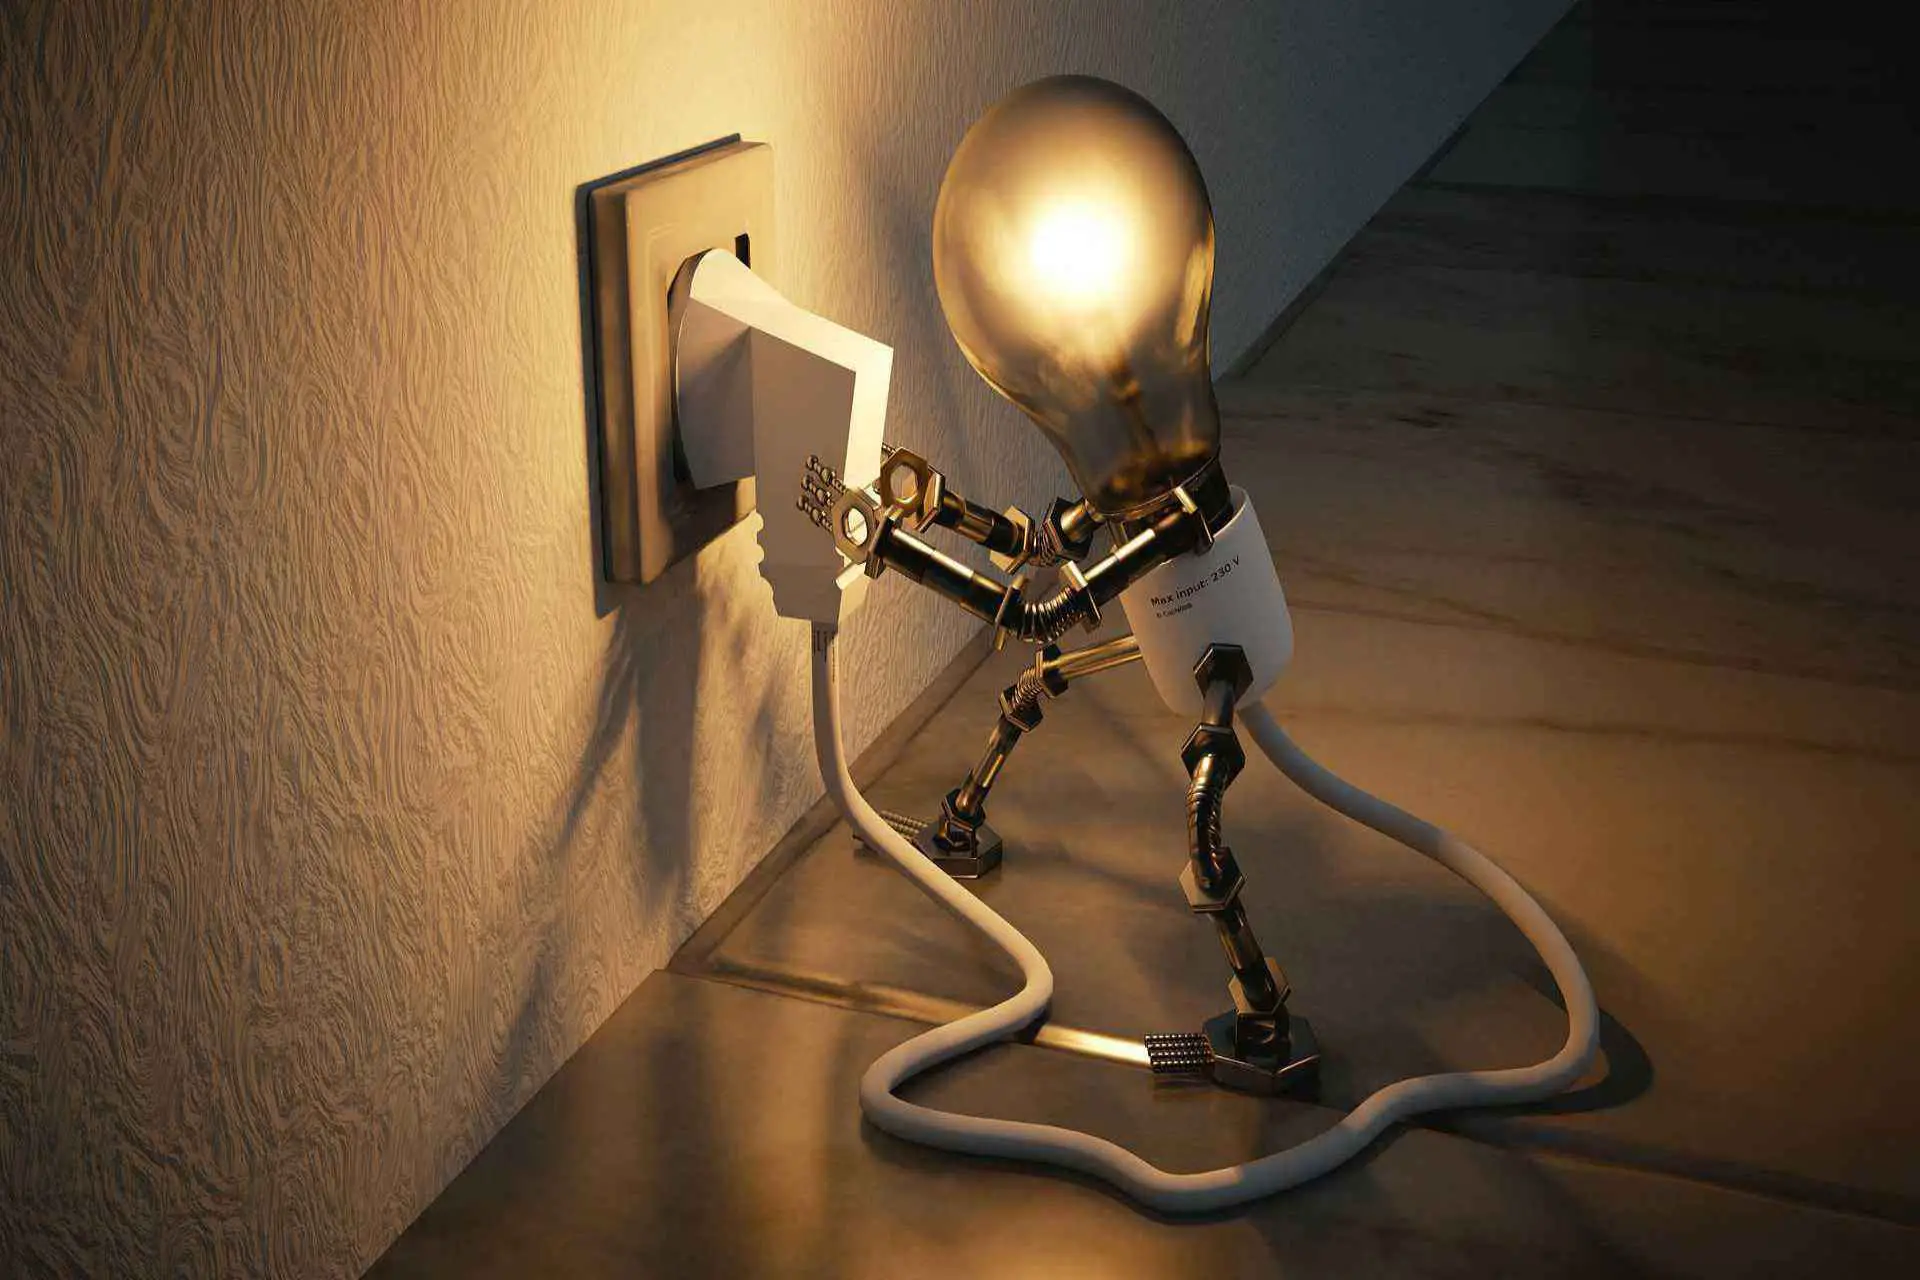 expensive habits wasting electricity_8